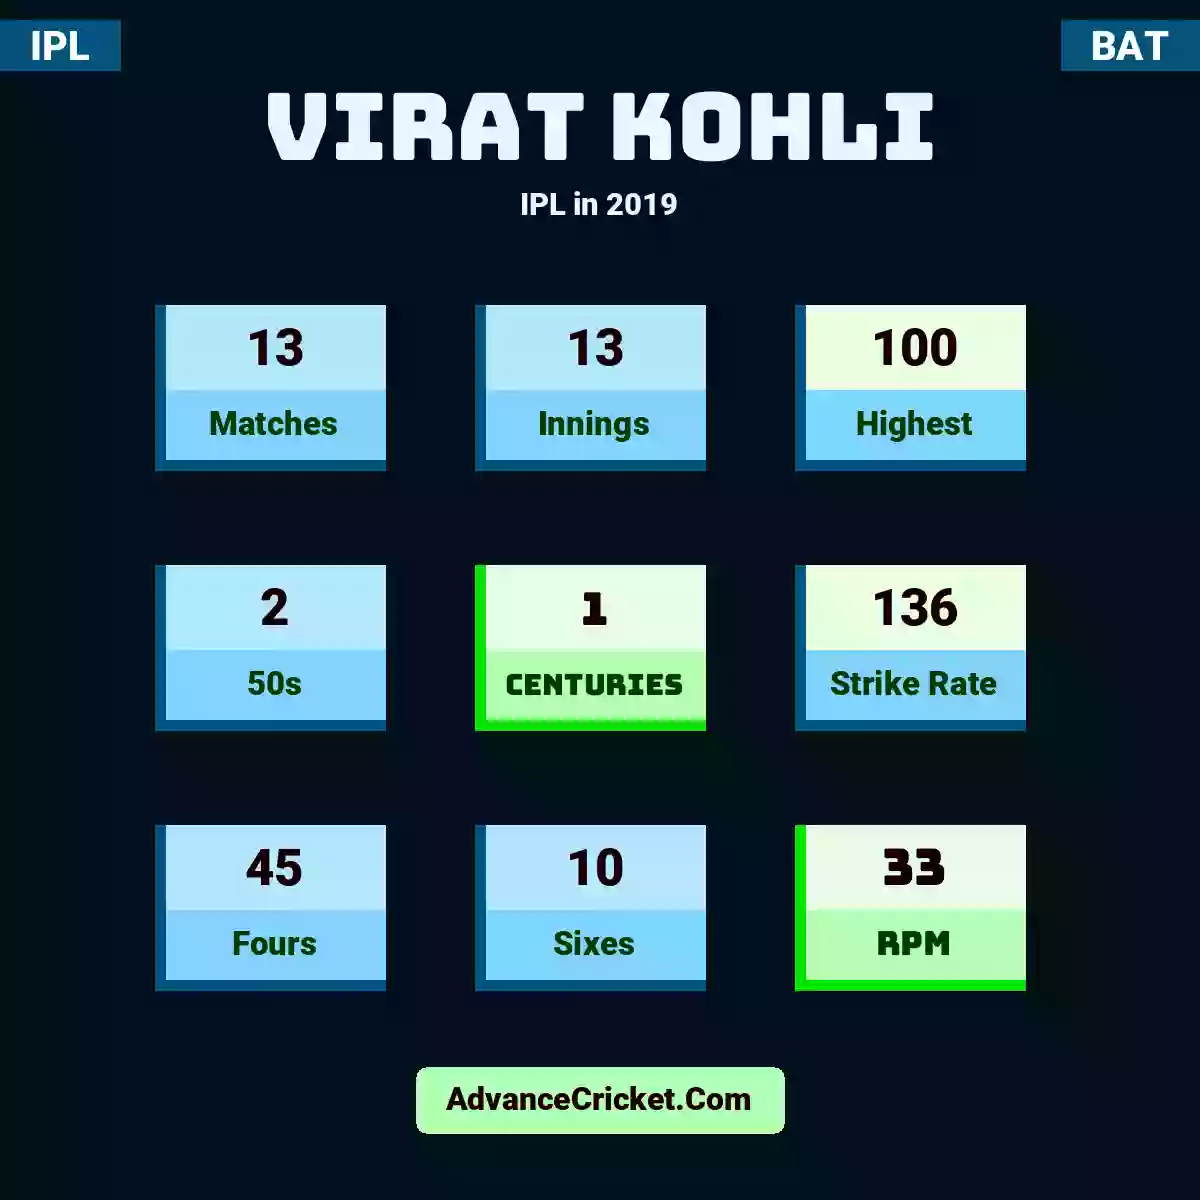 Virat Kohli IPL  in 2019, Virat Kohli played 13 matches, scored 100 runs as highest, 2 half-centuries, and 1 centuries, with a strike rate of 136. V.Kohli hit 45 fours and 10 sixes, with an RPM of 33.